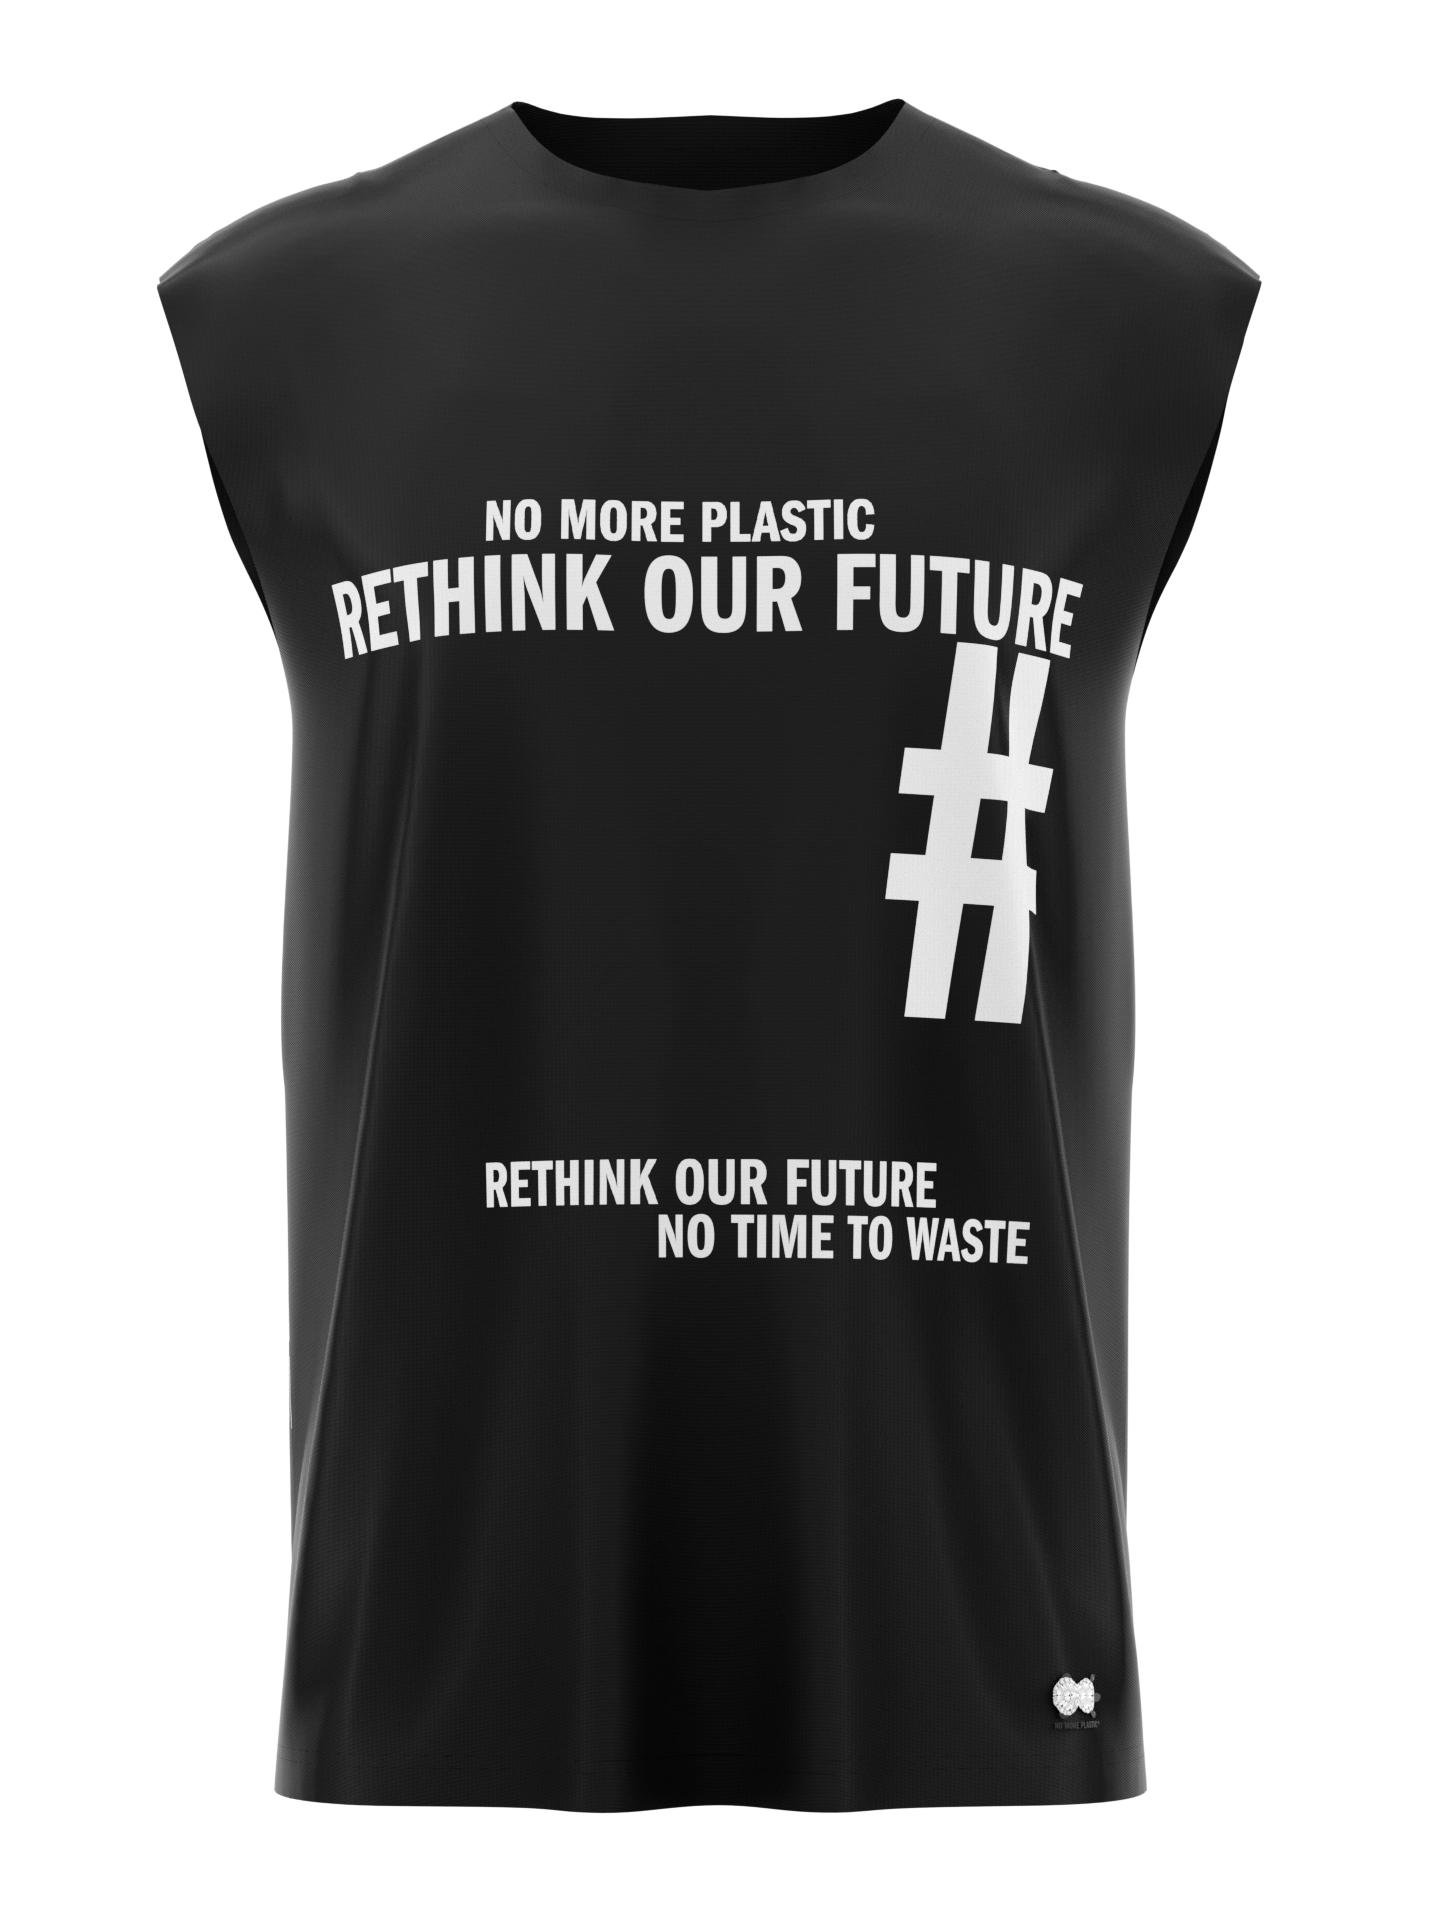 No More Plastic Rethink our future T-SHIRT by NO MORE PLASTIC